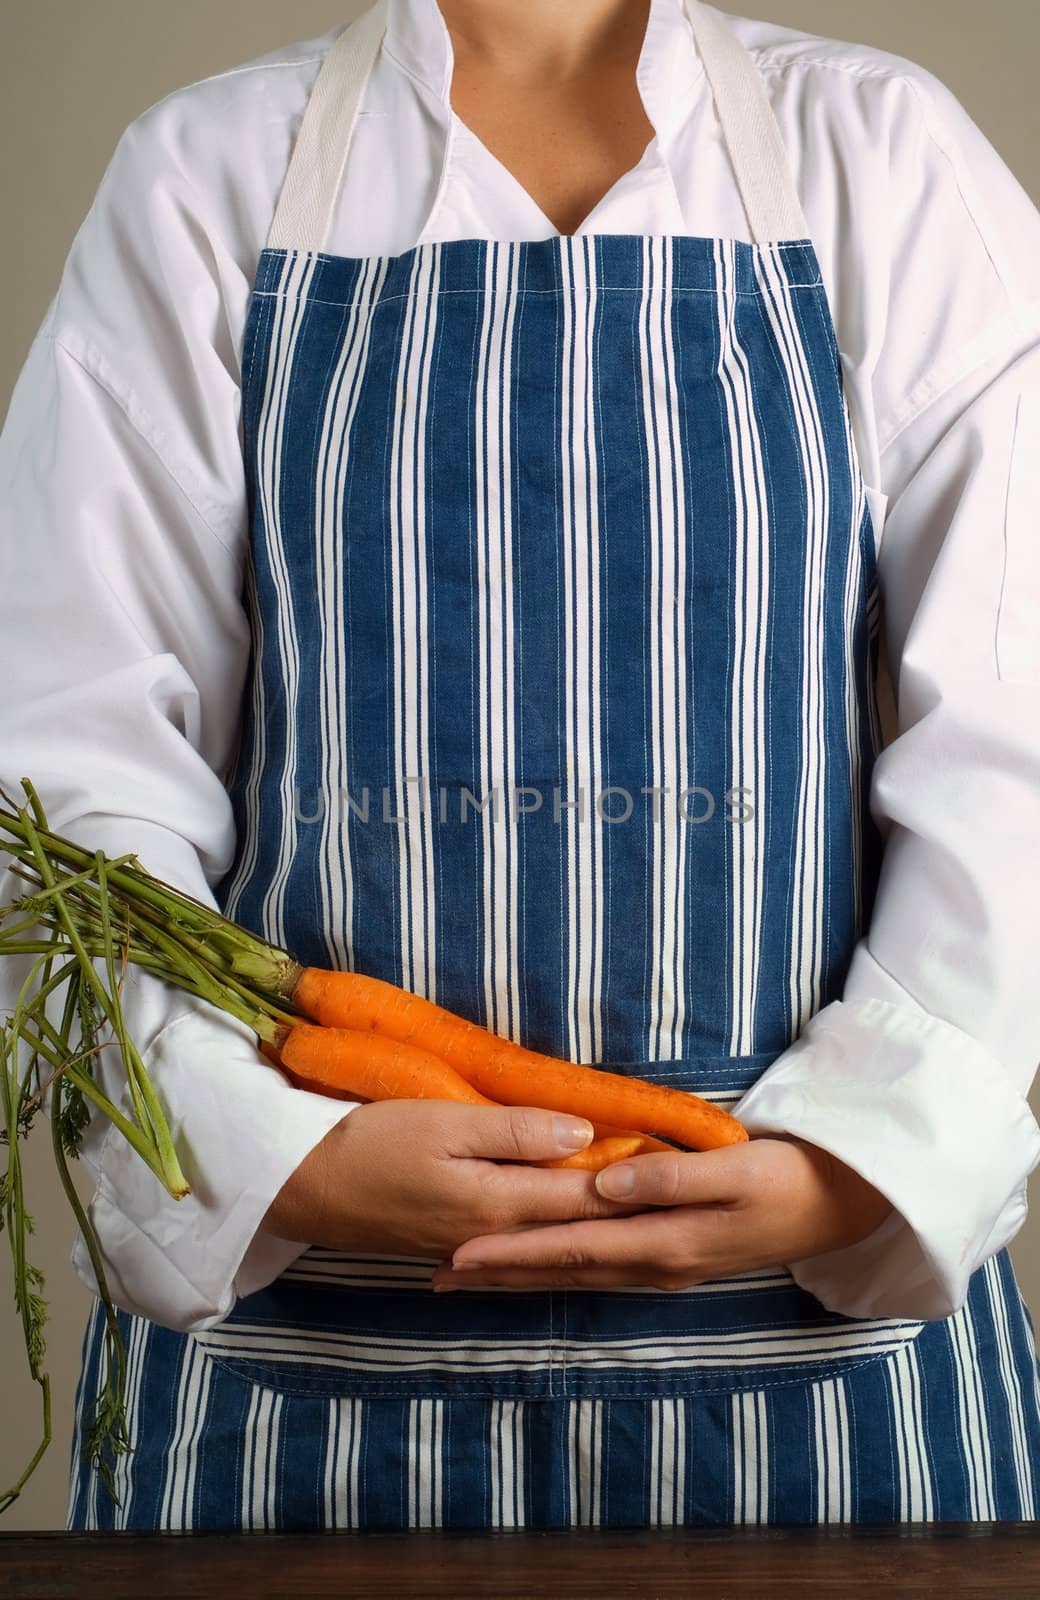 Woman chef with carrots by alistaircotton